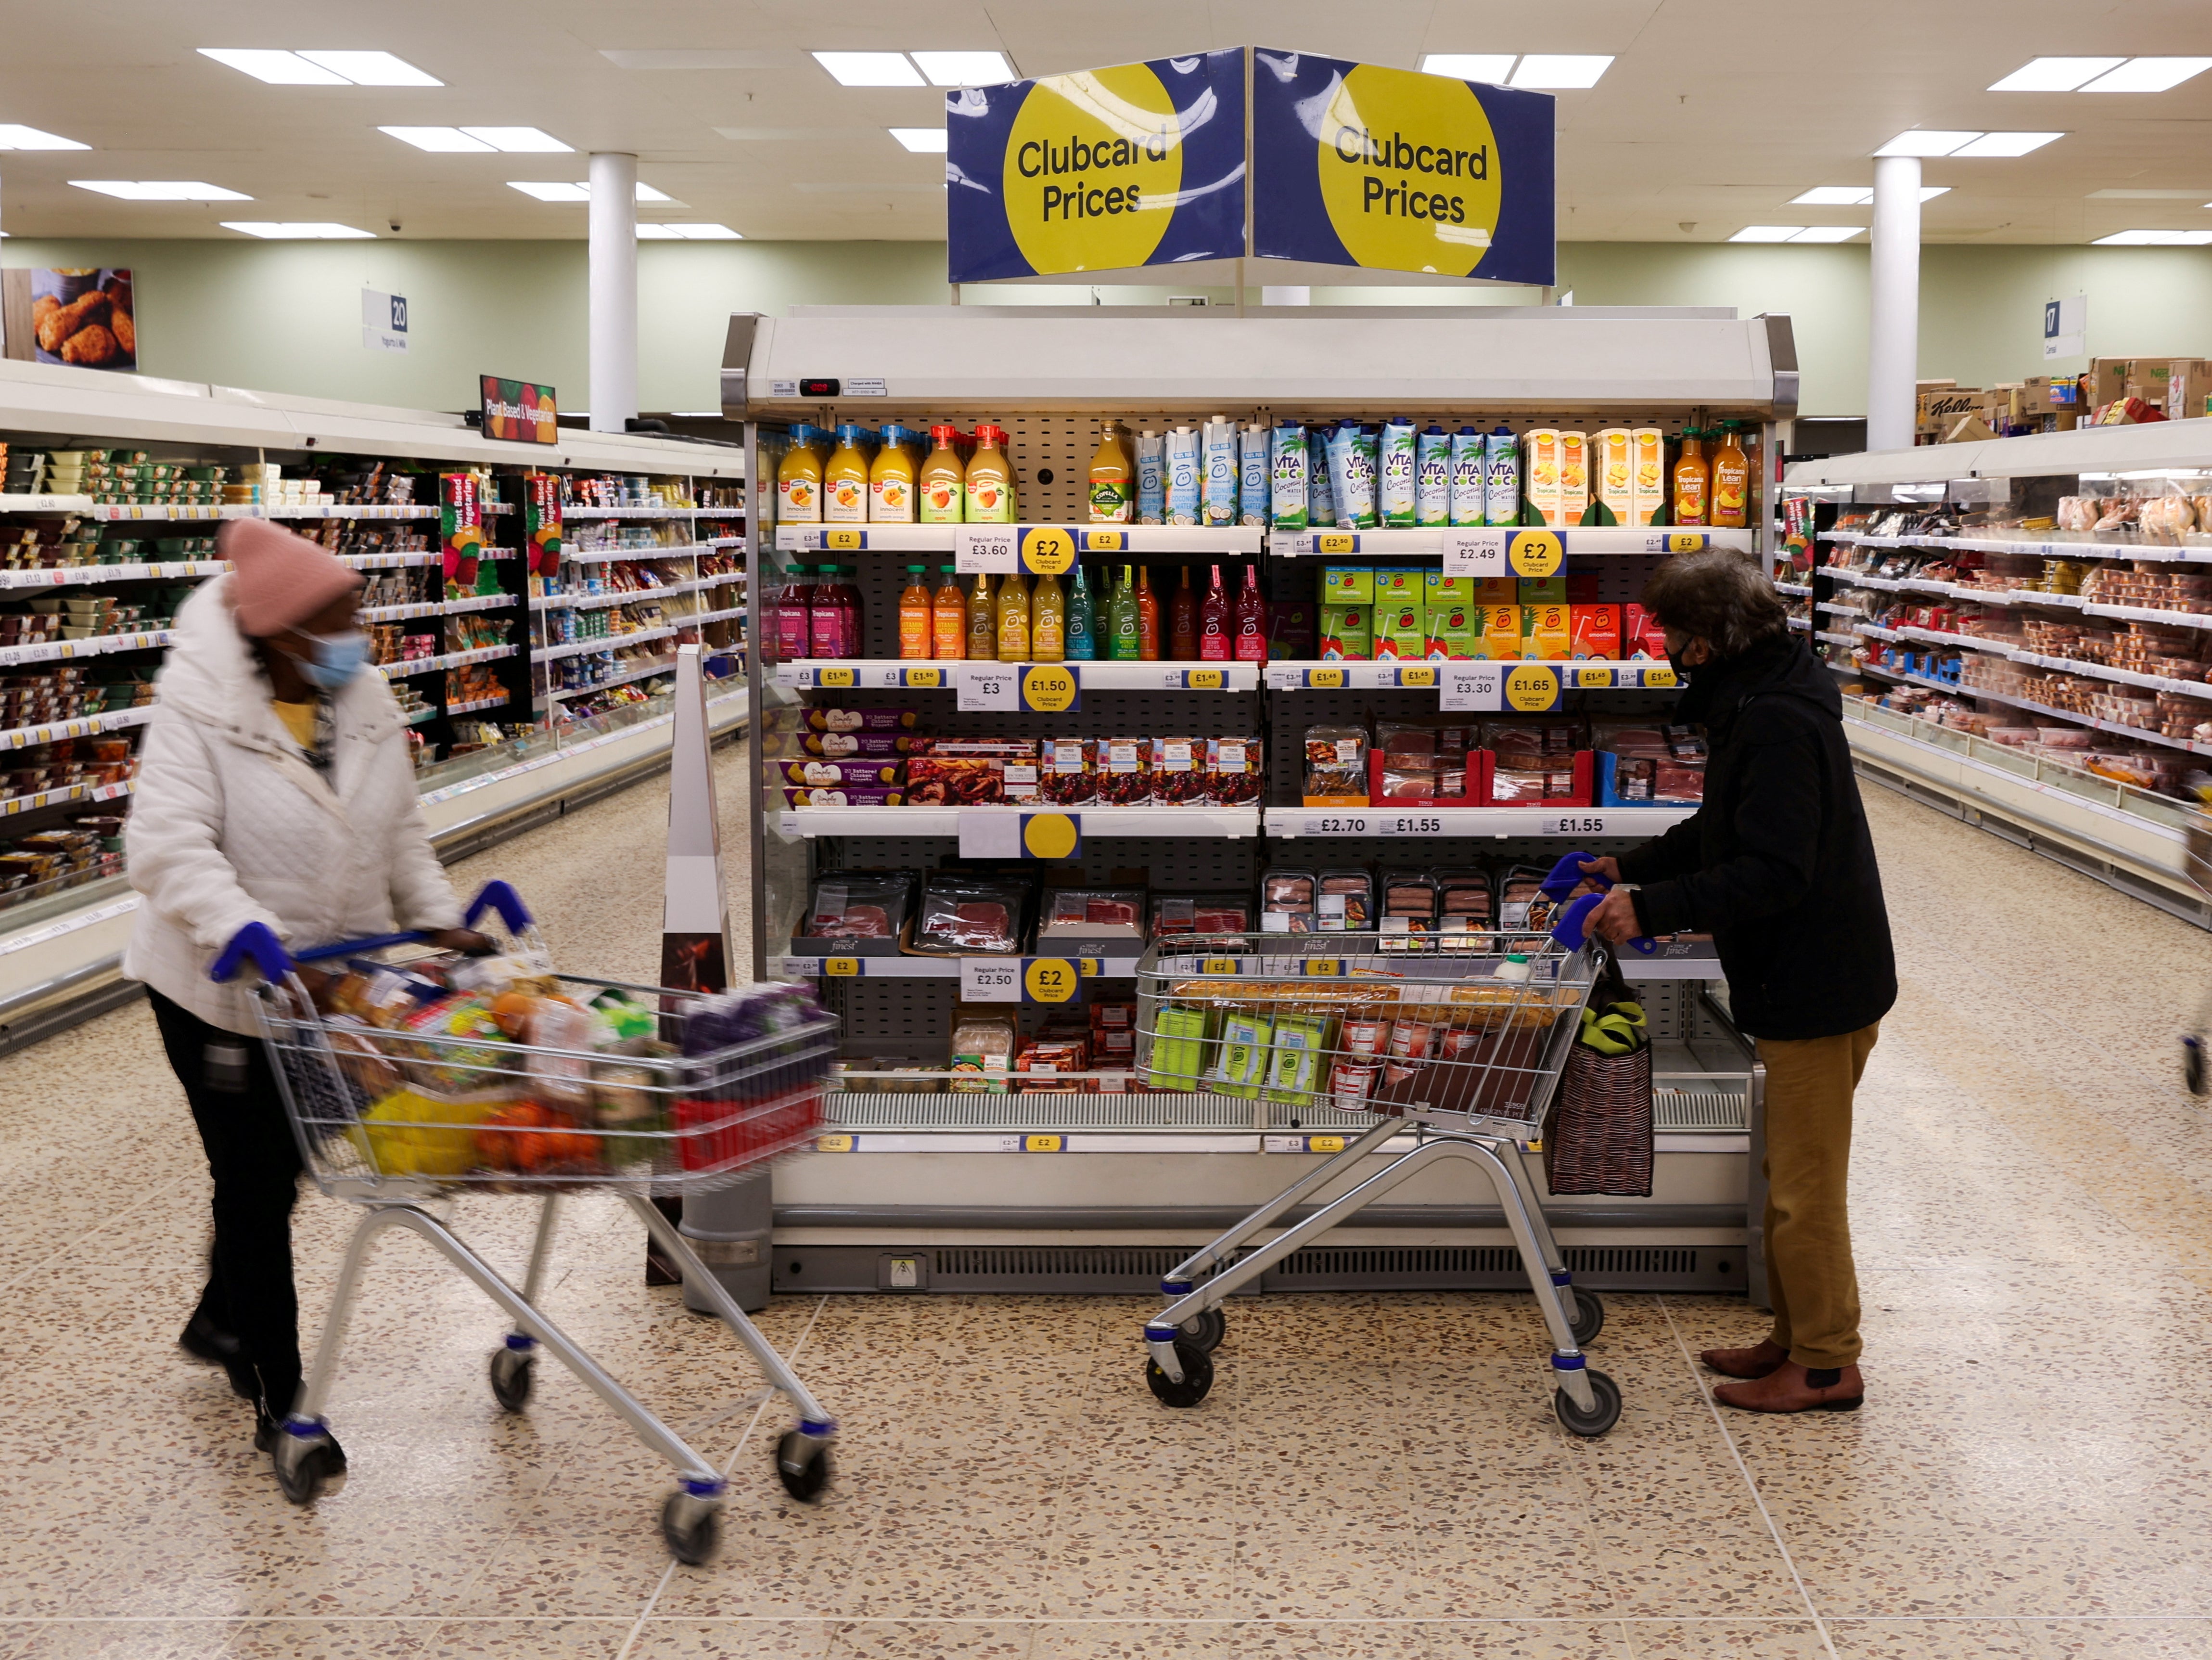 In store managers at Tesco feeling chill as prices rise